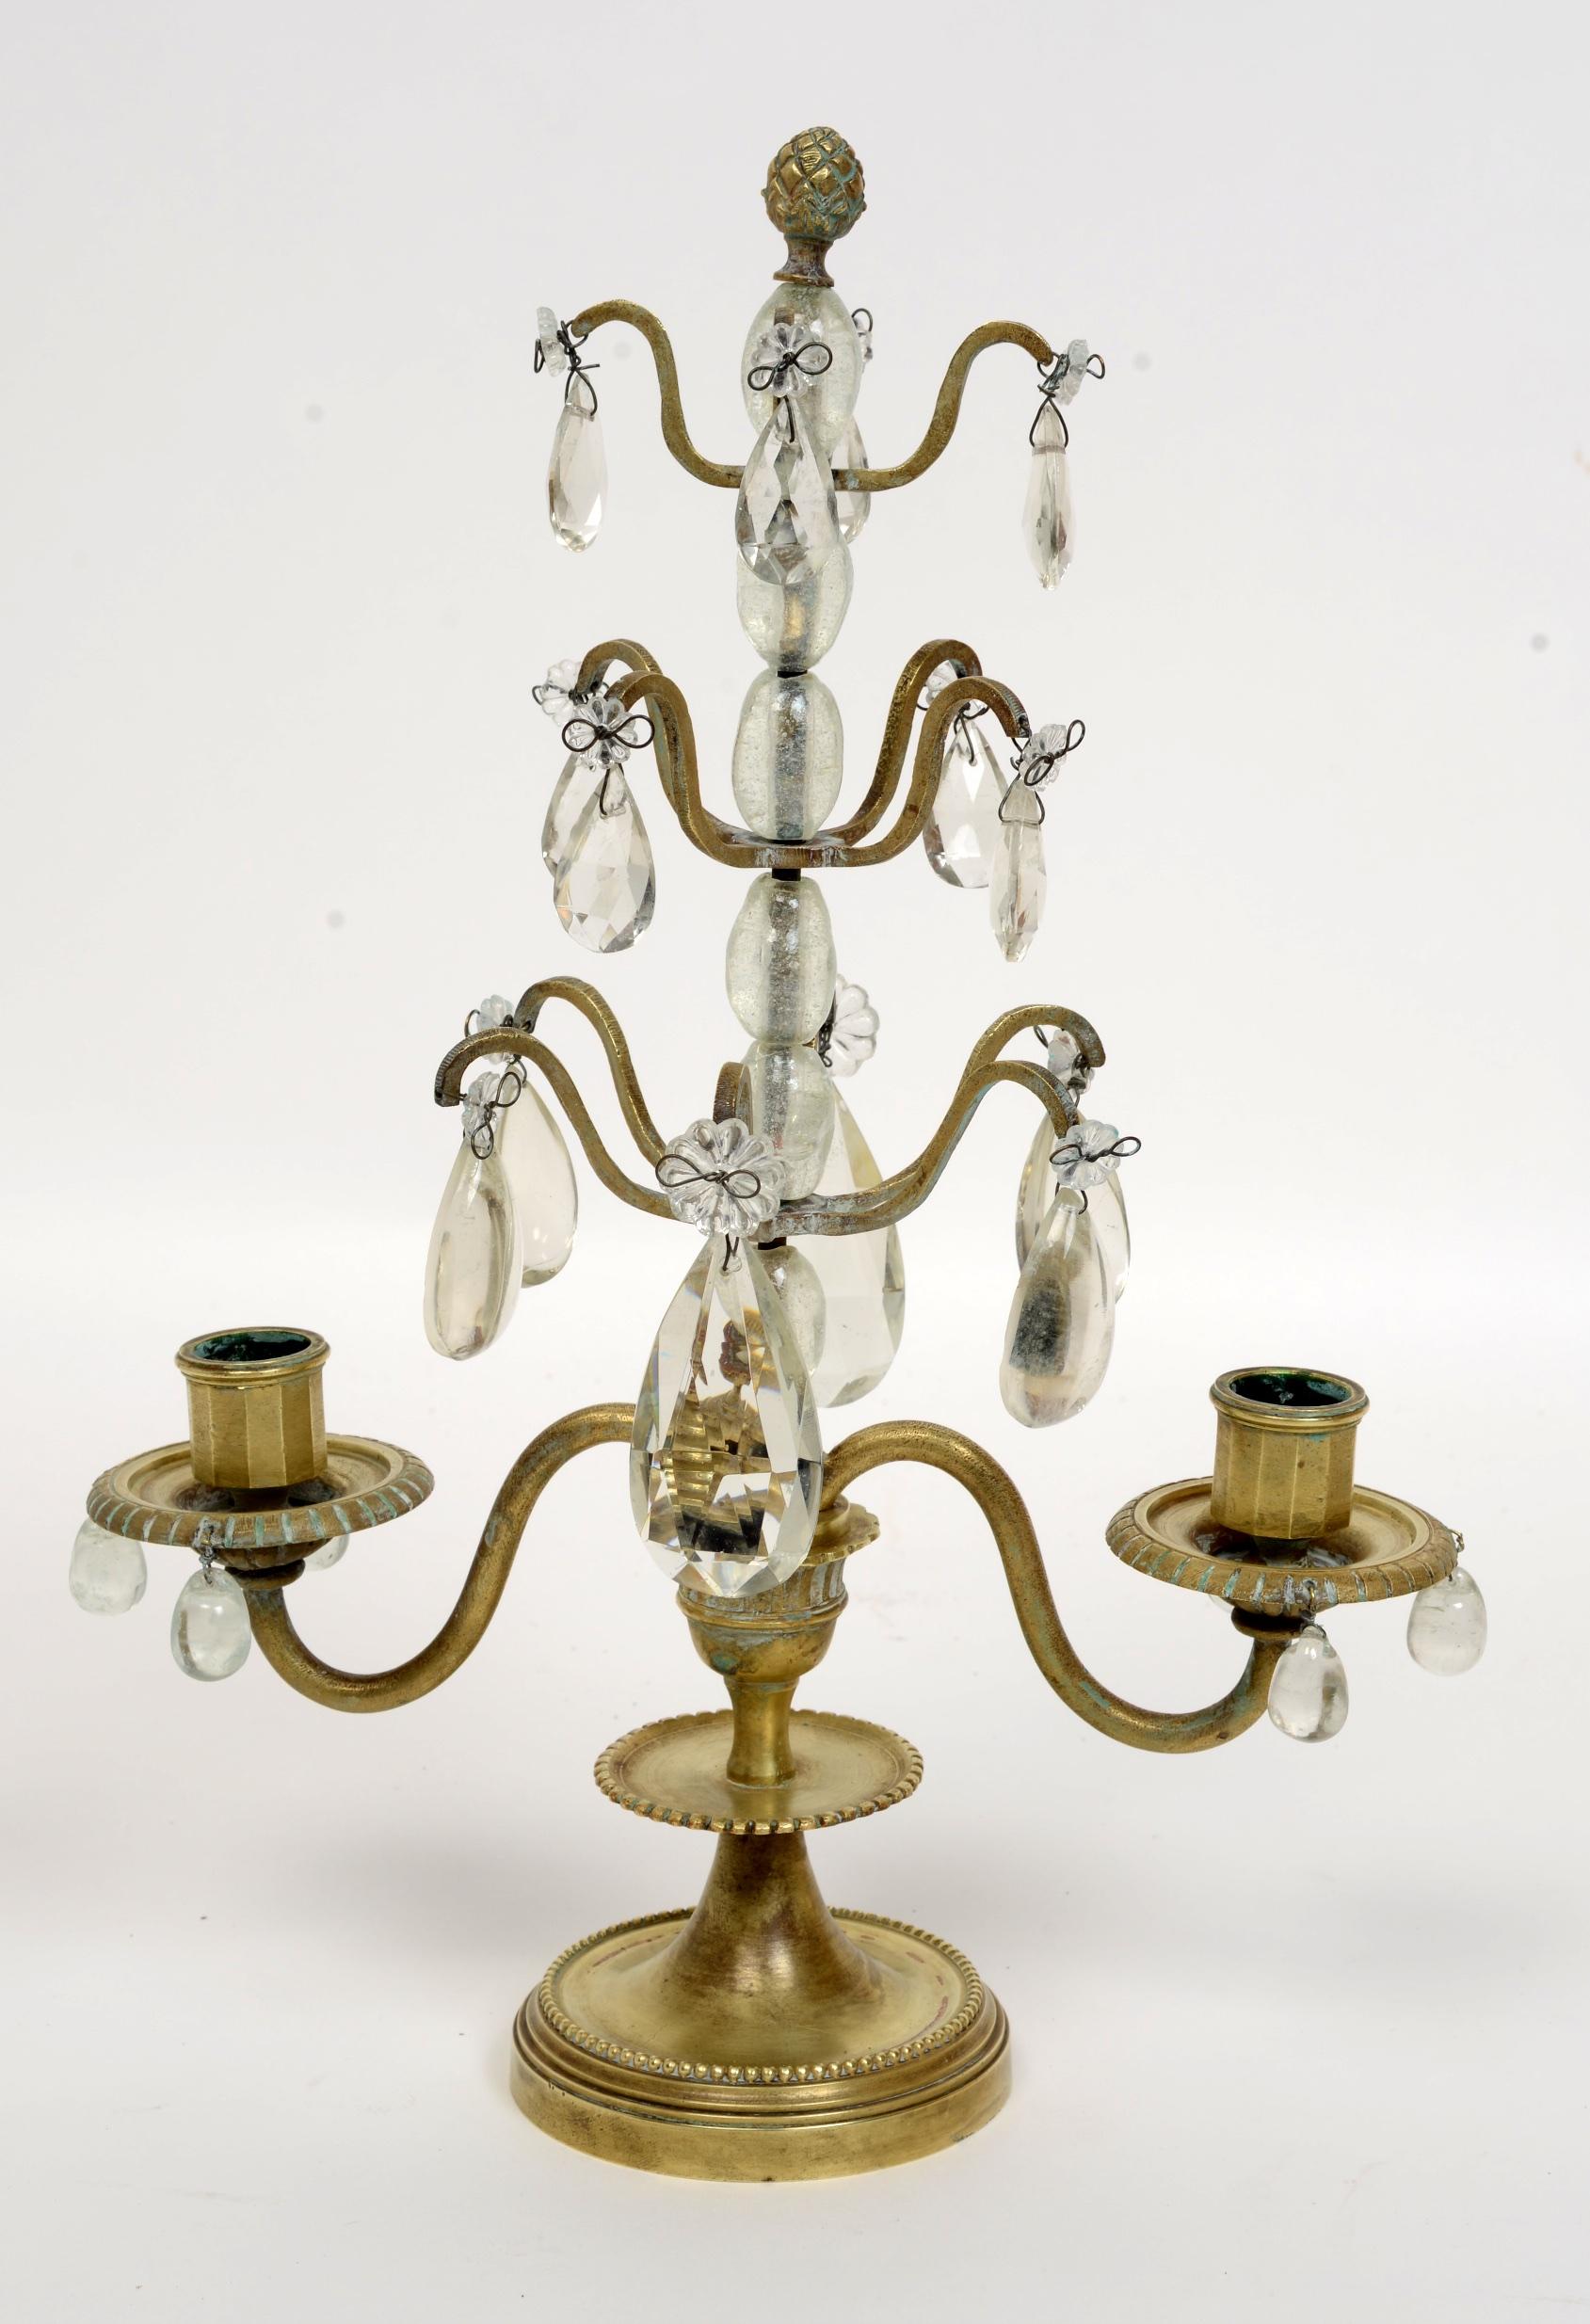 Pair of rock crystal, lead crystal and brass candelabra, late 19th century. This pair of candelabras have a series of large rock crystal beads supporting their stems topped by a pineapple shaped brass finial. From each graduating branch hang crystal